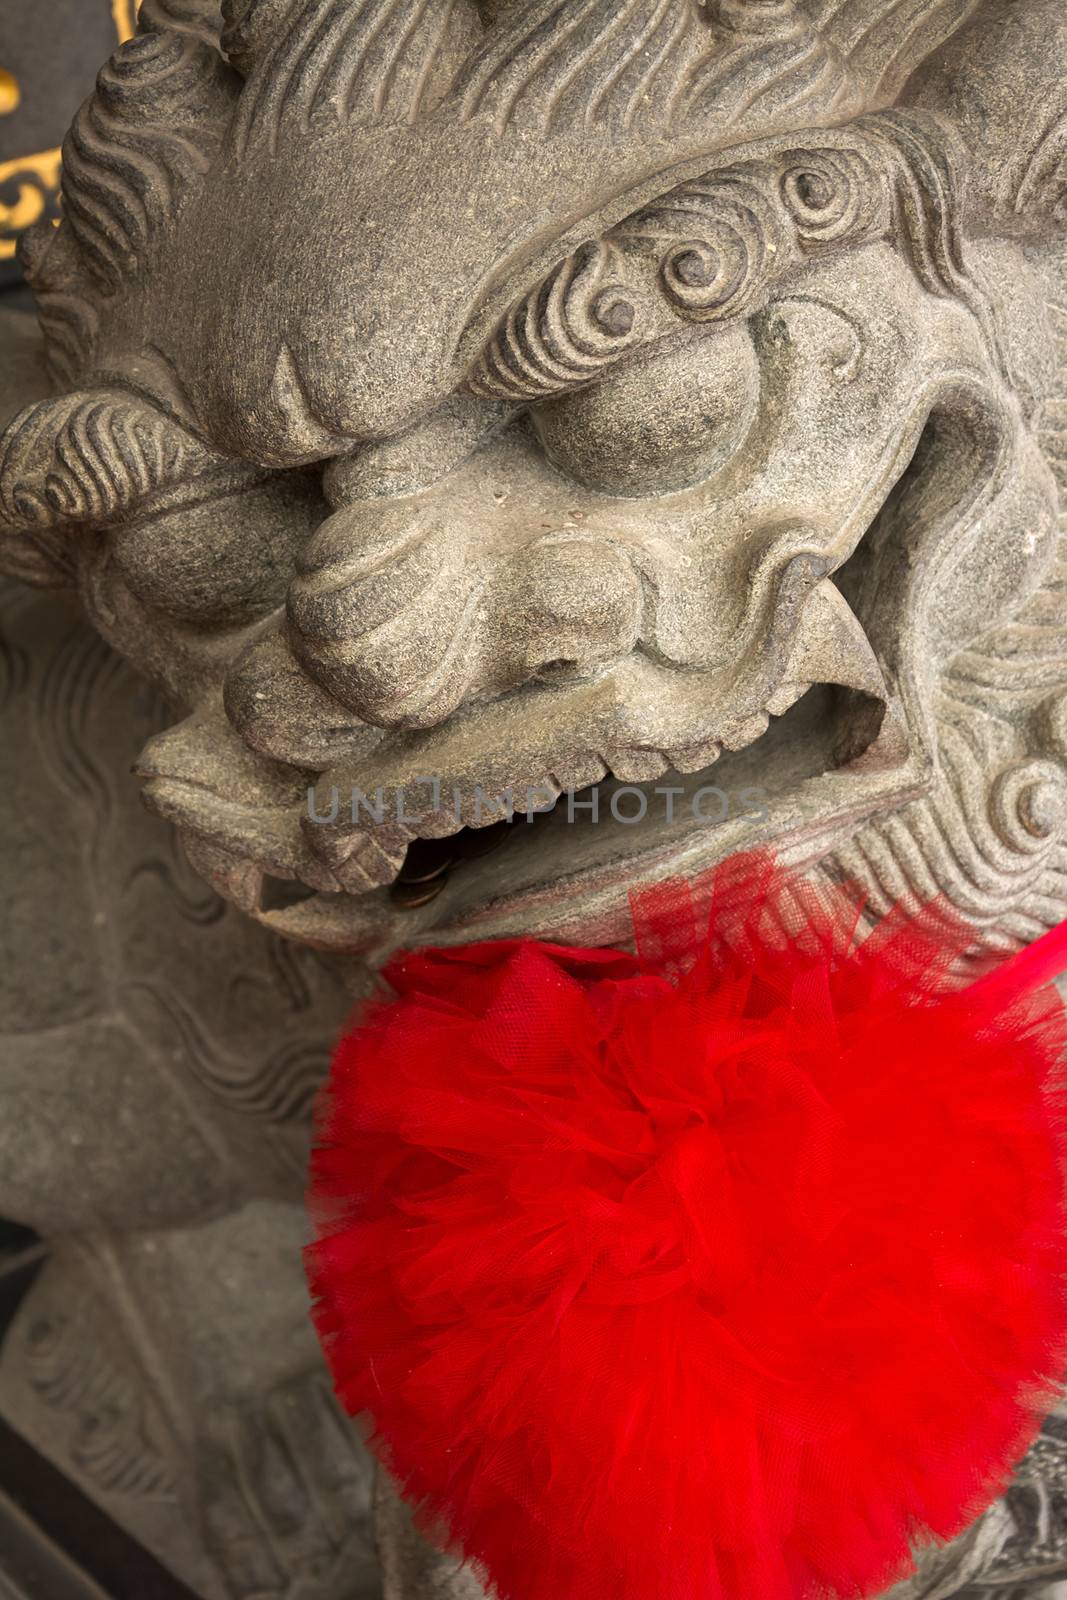 Chinese temple animal statue - lion